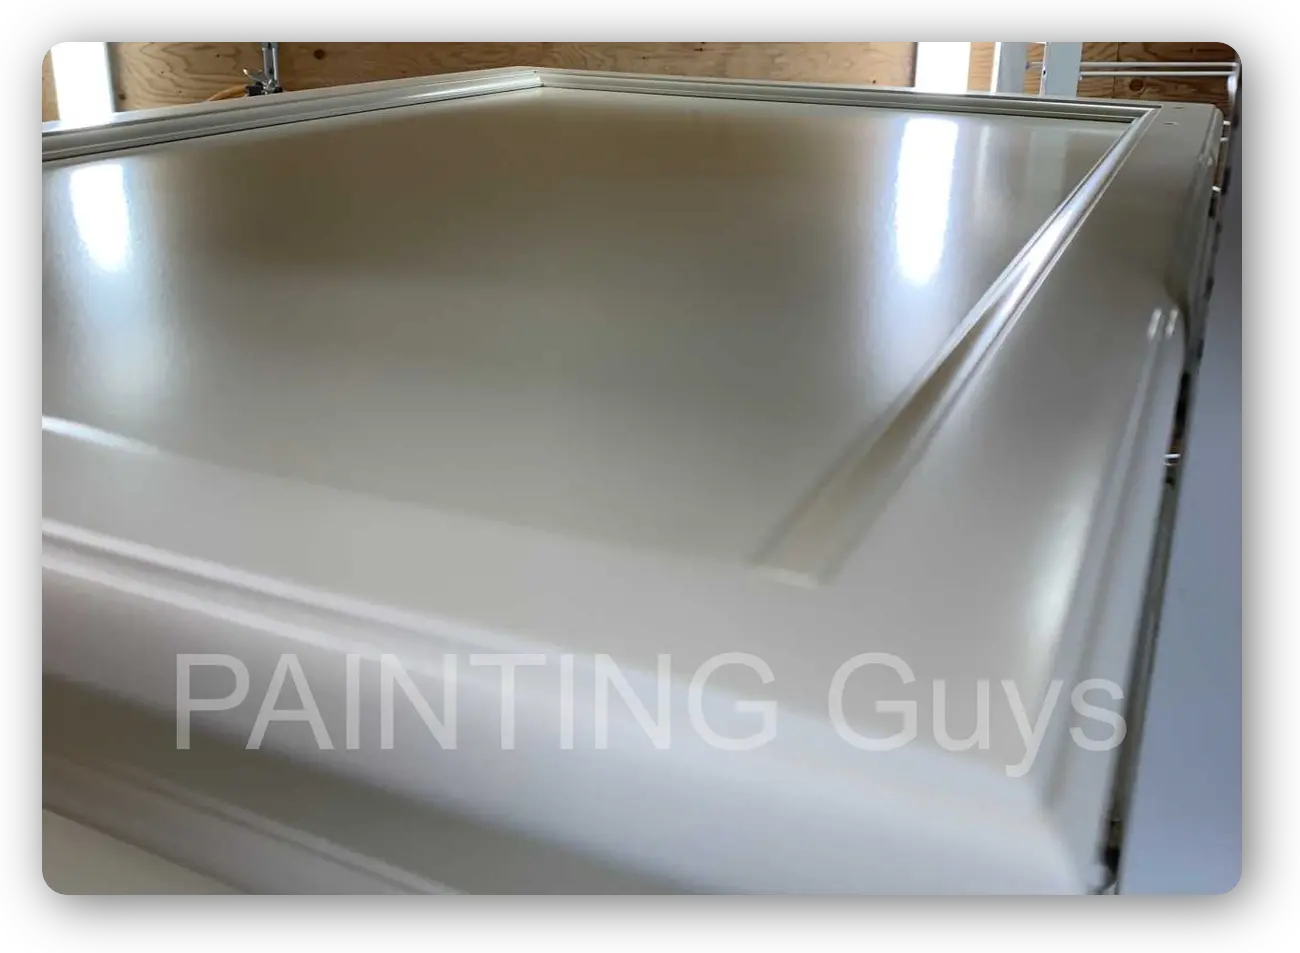 Kitchen cabinet painting - spraying doors and drawers PAINTING Guys